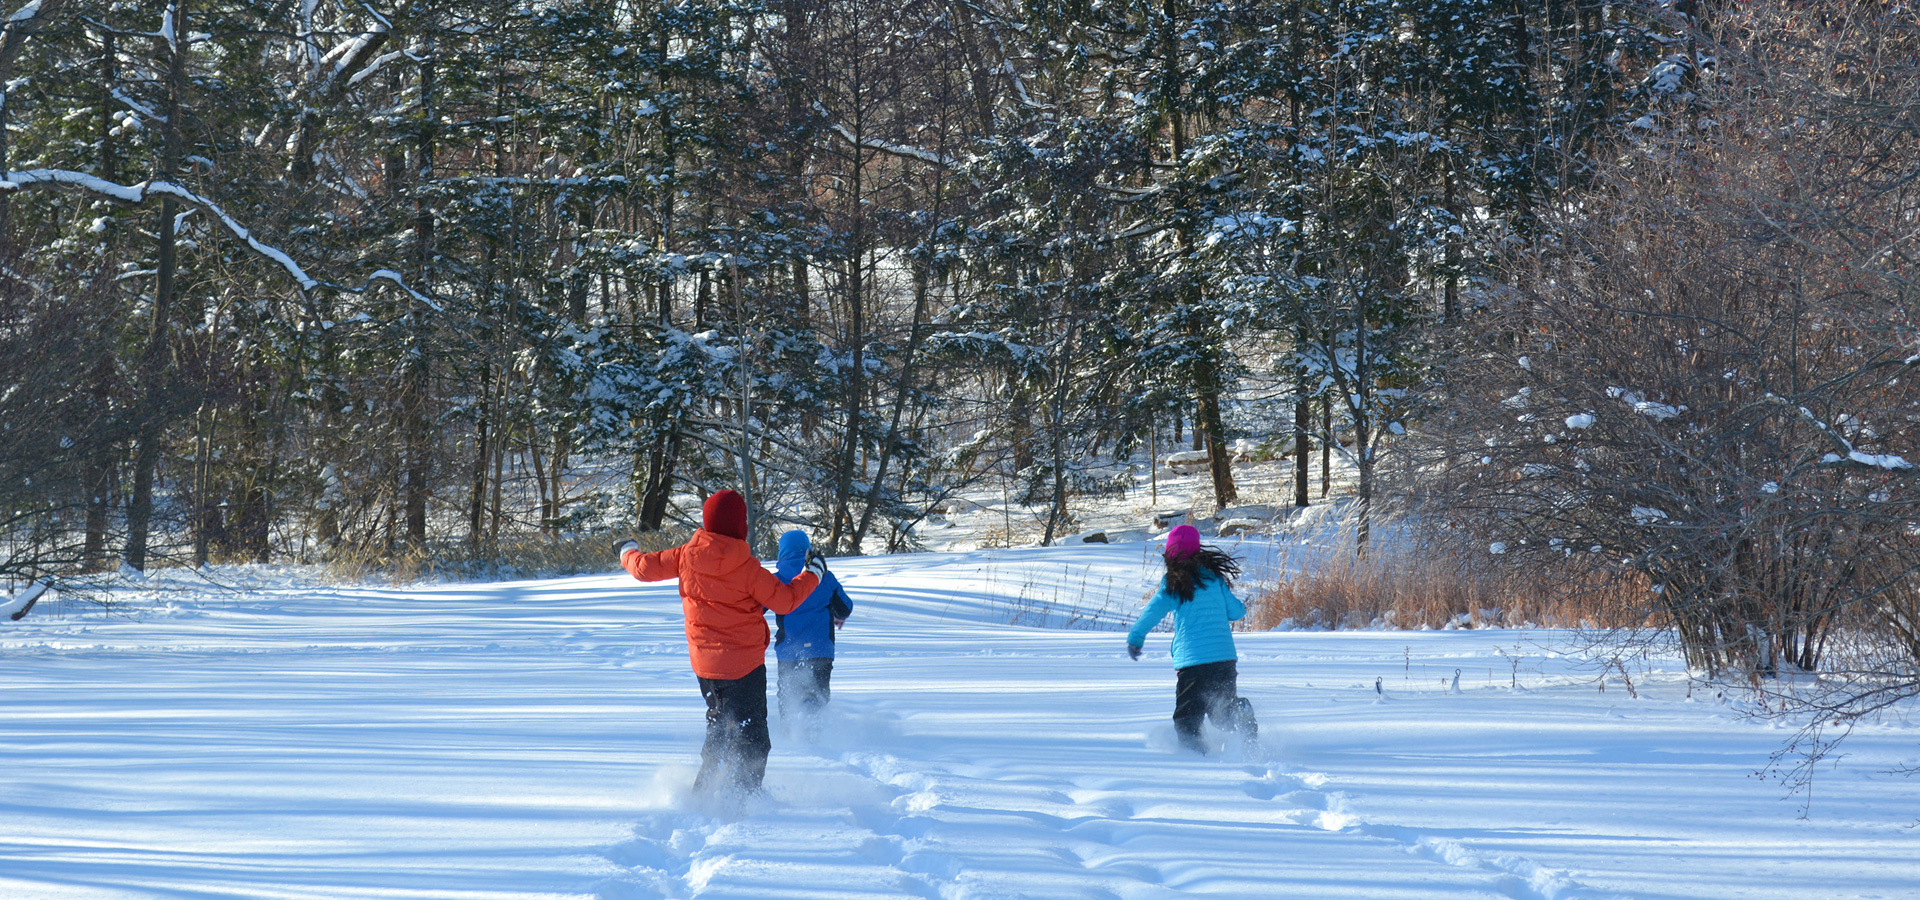 Children playing in the snow at the Arboretum in Winter